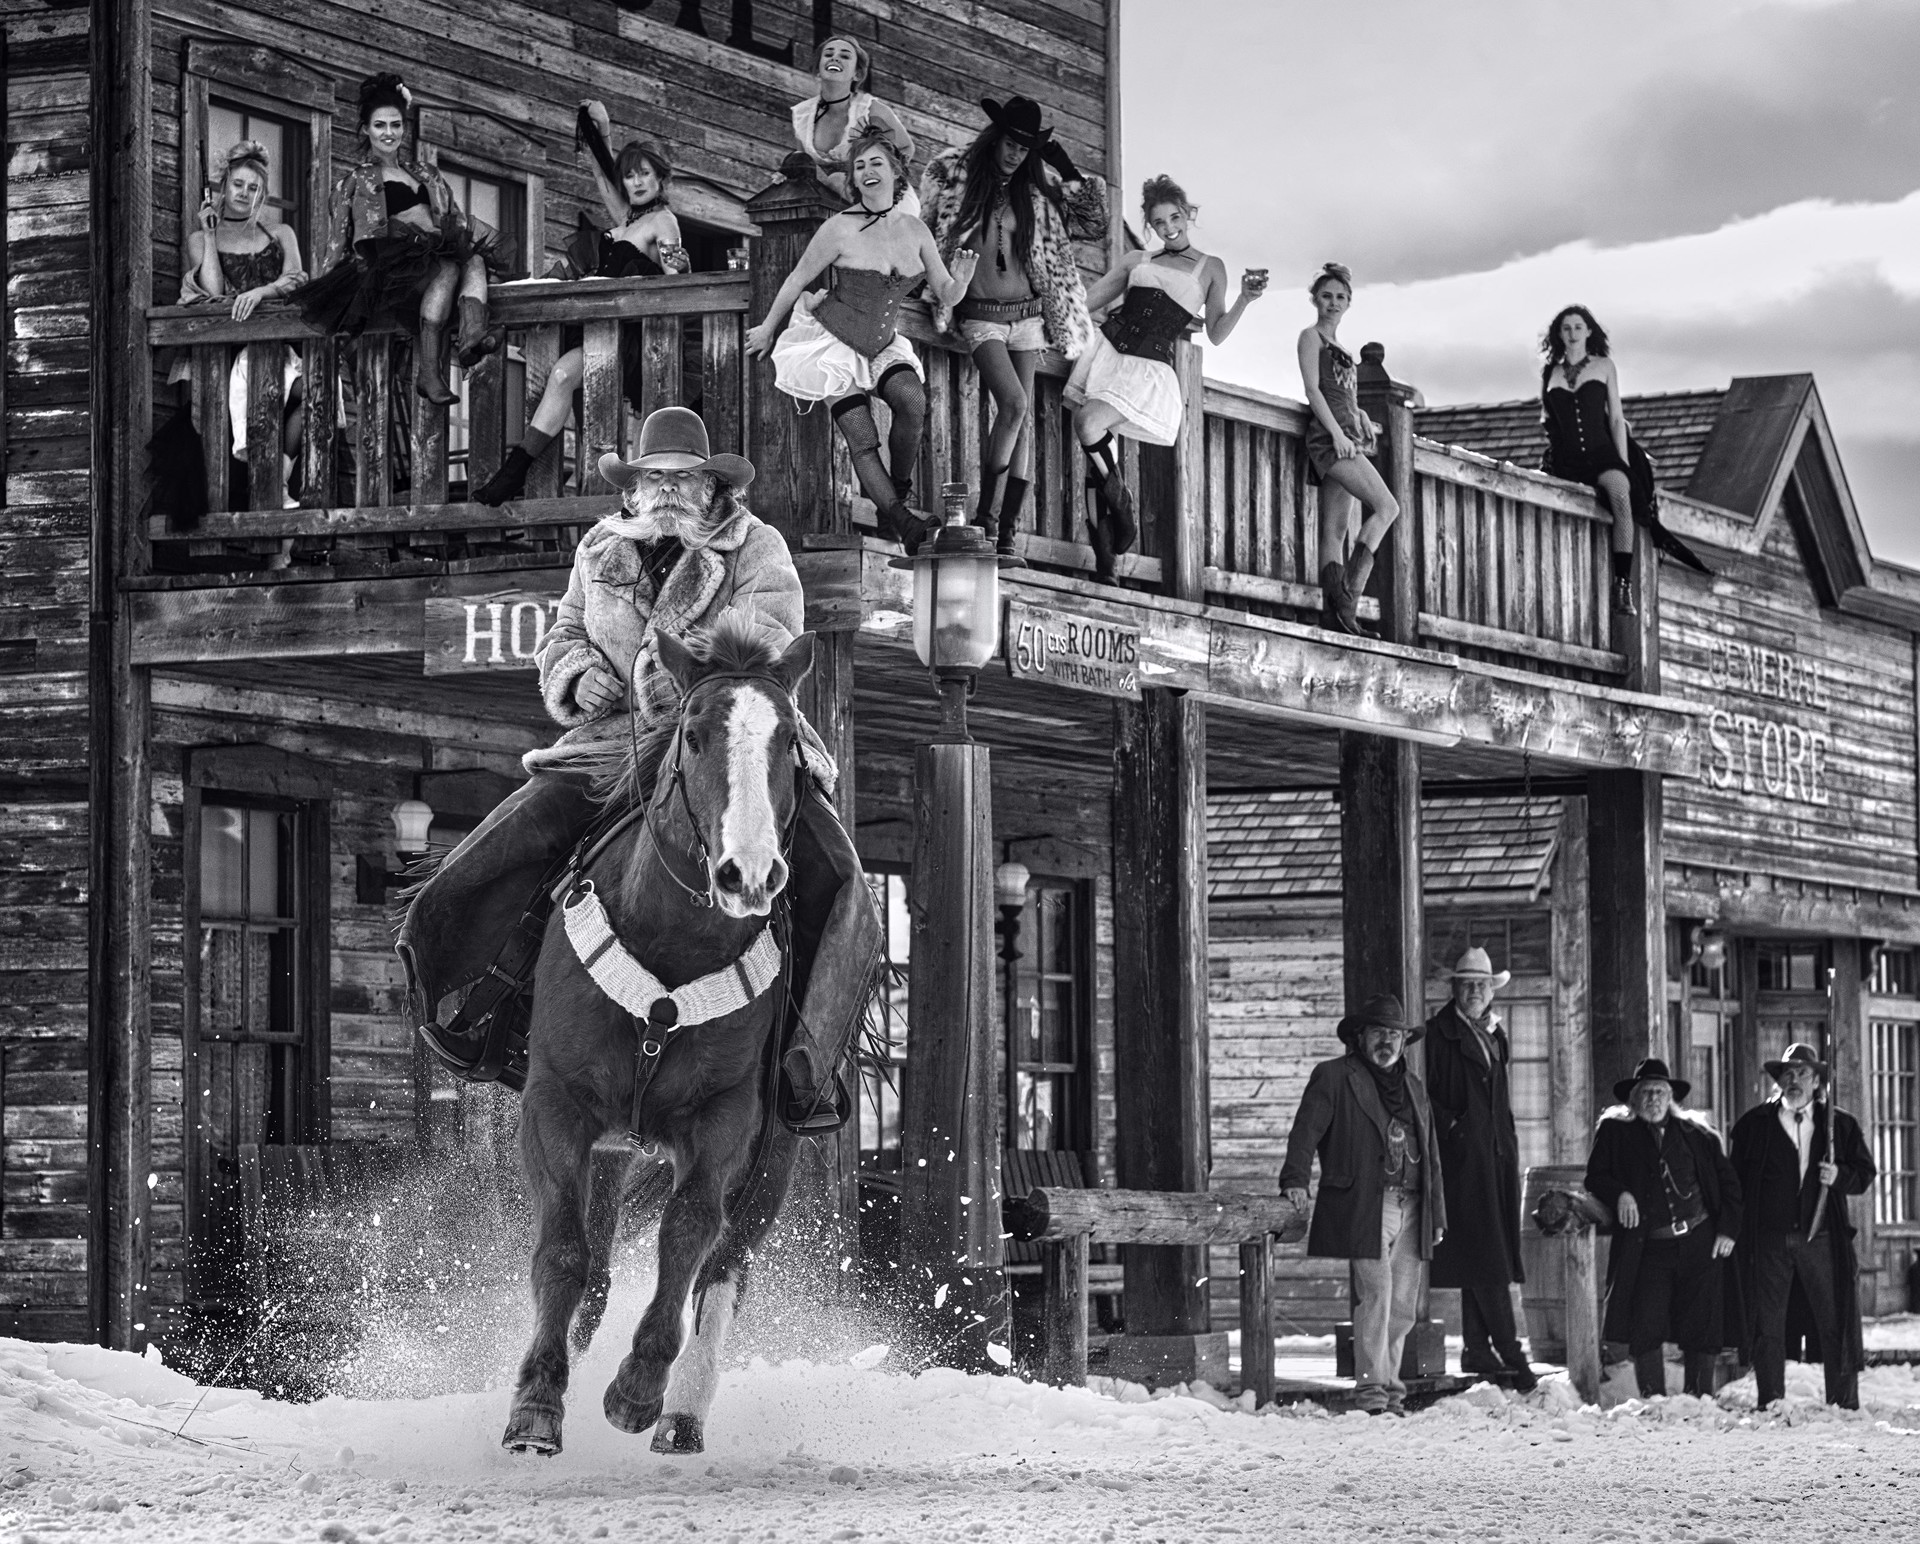 Mama Don't Let your Children Grow up to be Cowboy by David Yarrow